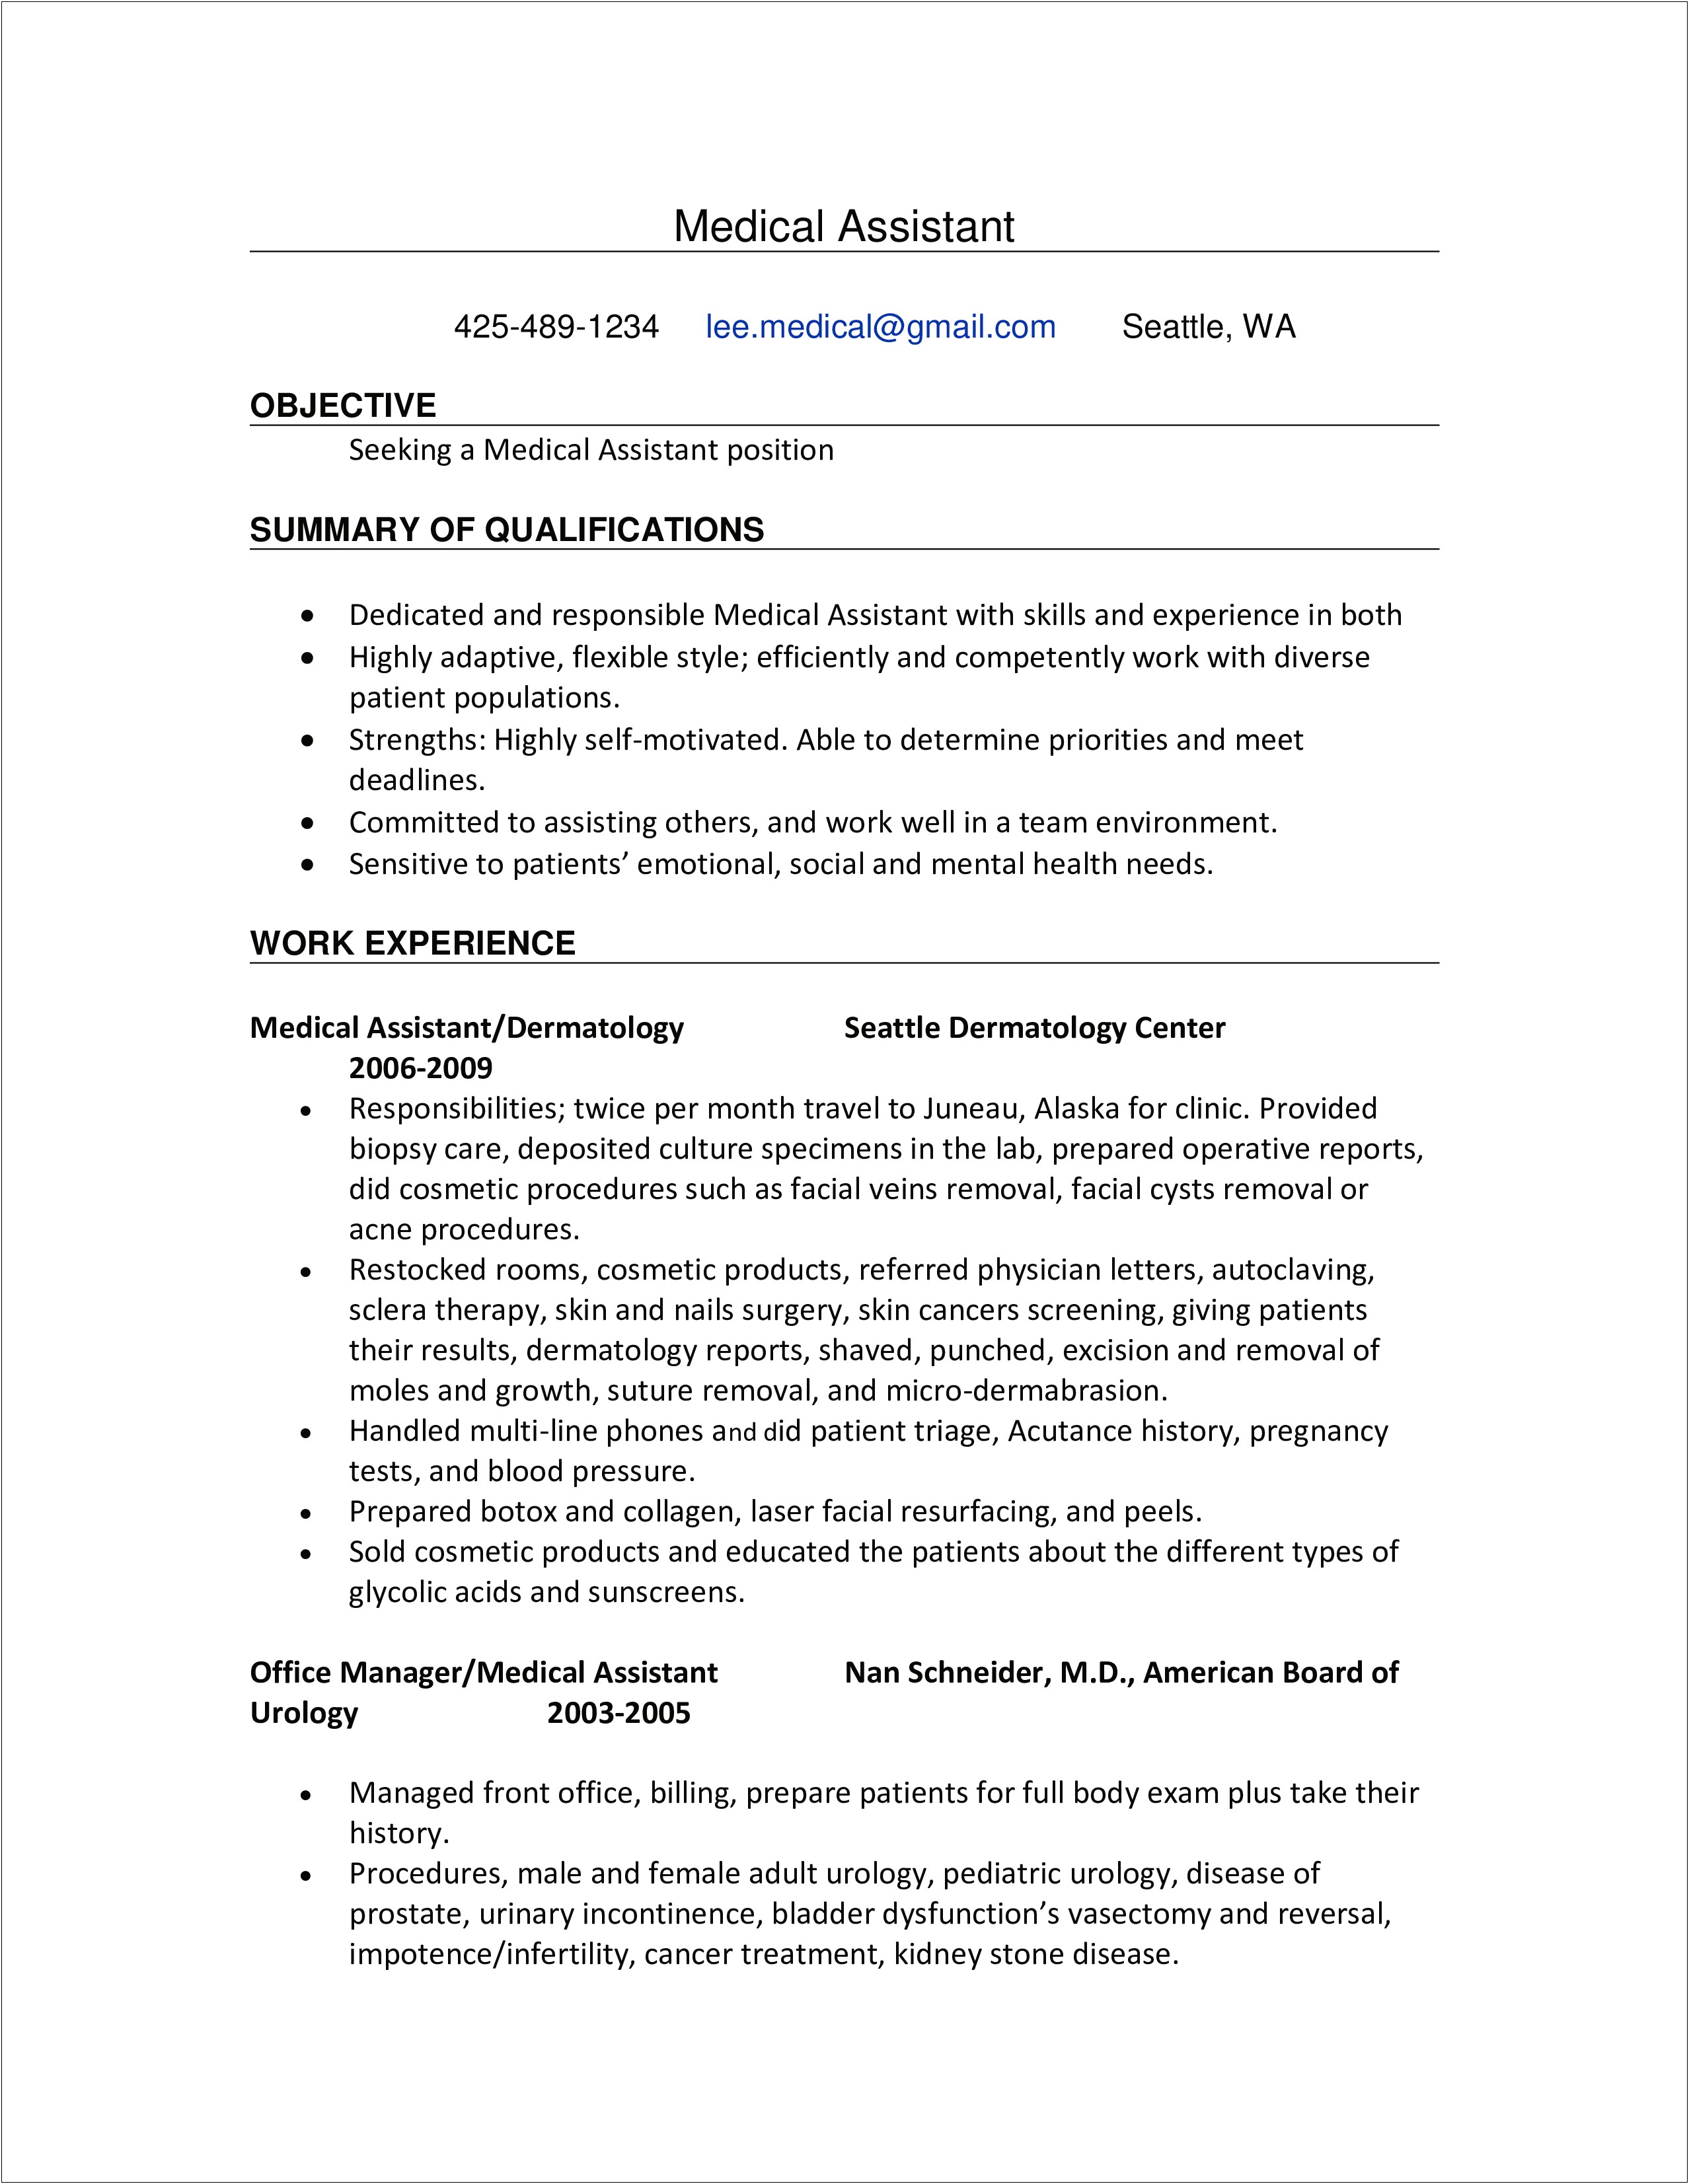 Work Experience Resume For Medical Assistant